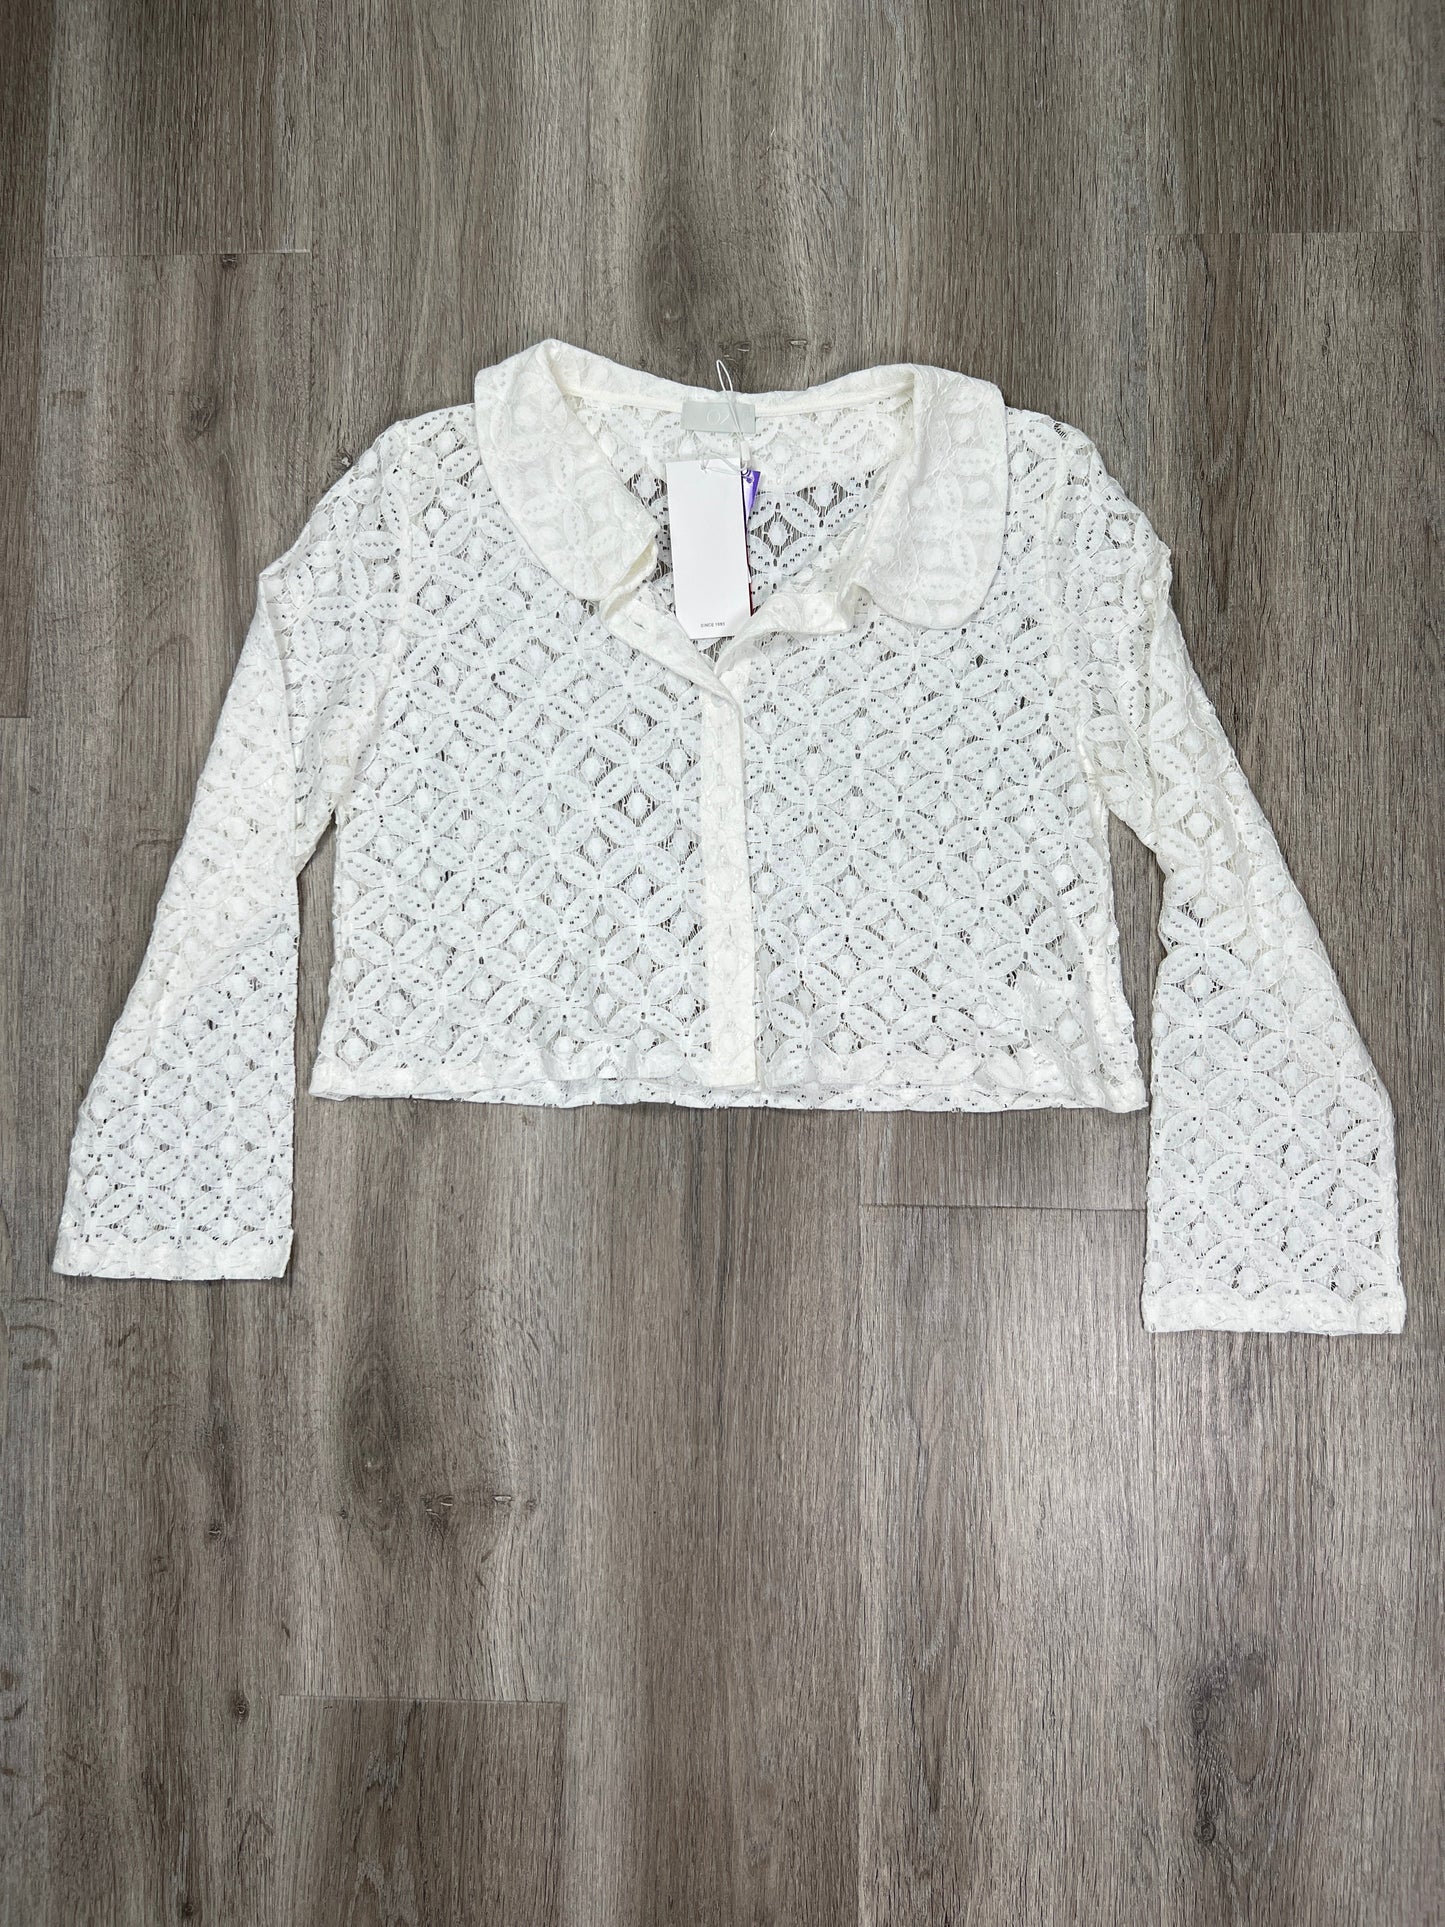 White Top Long Sleeve Q2, Size L